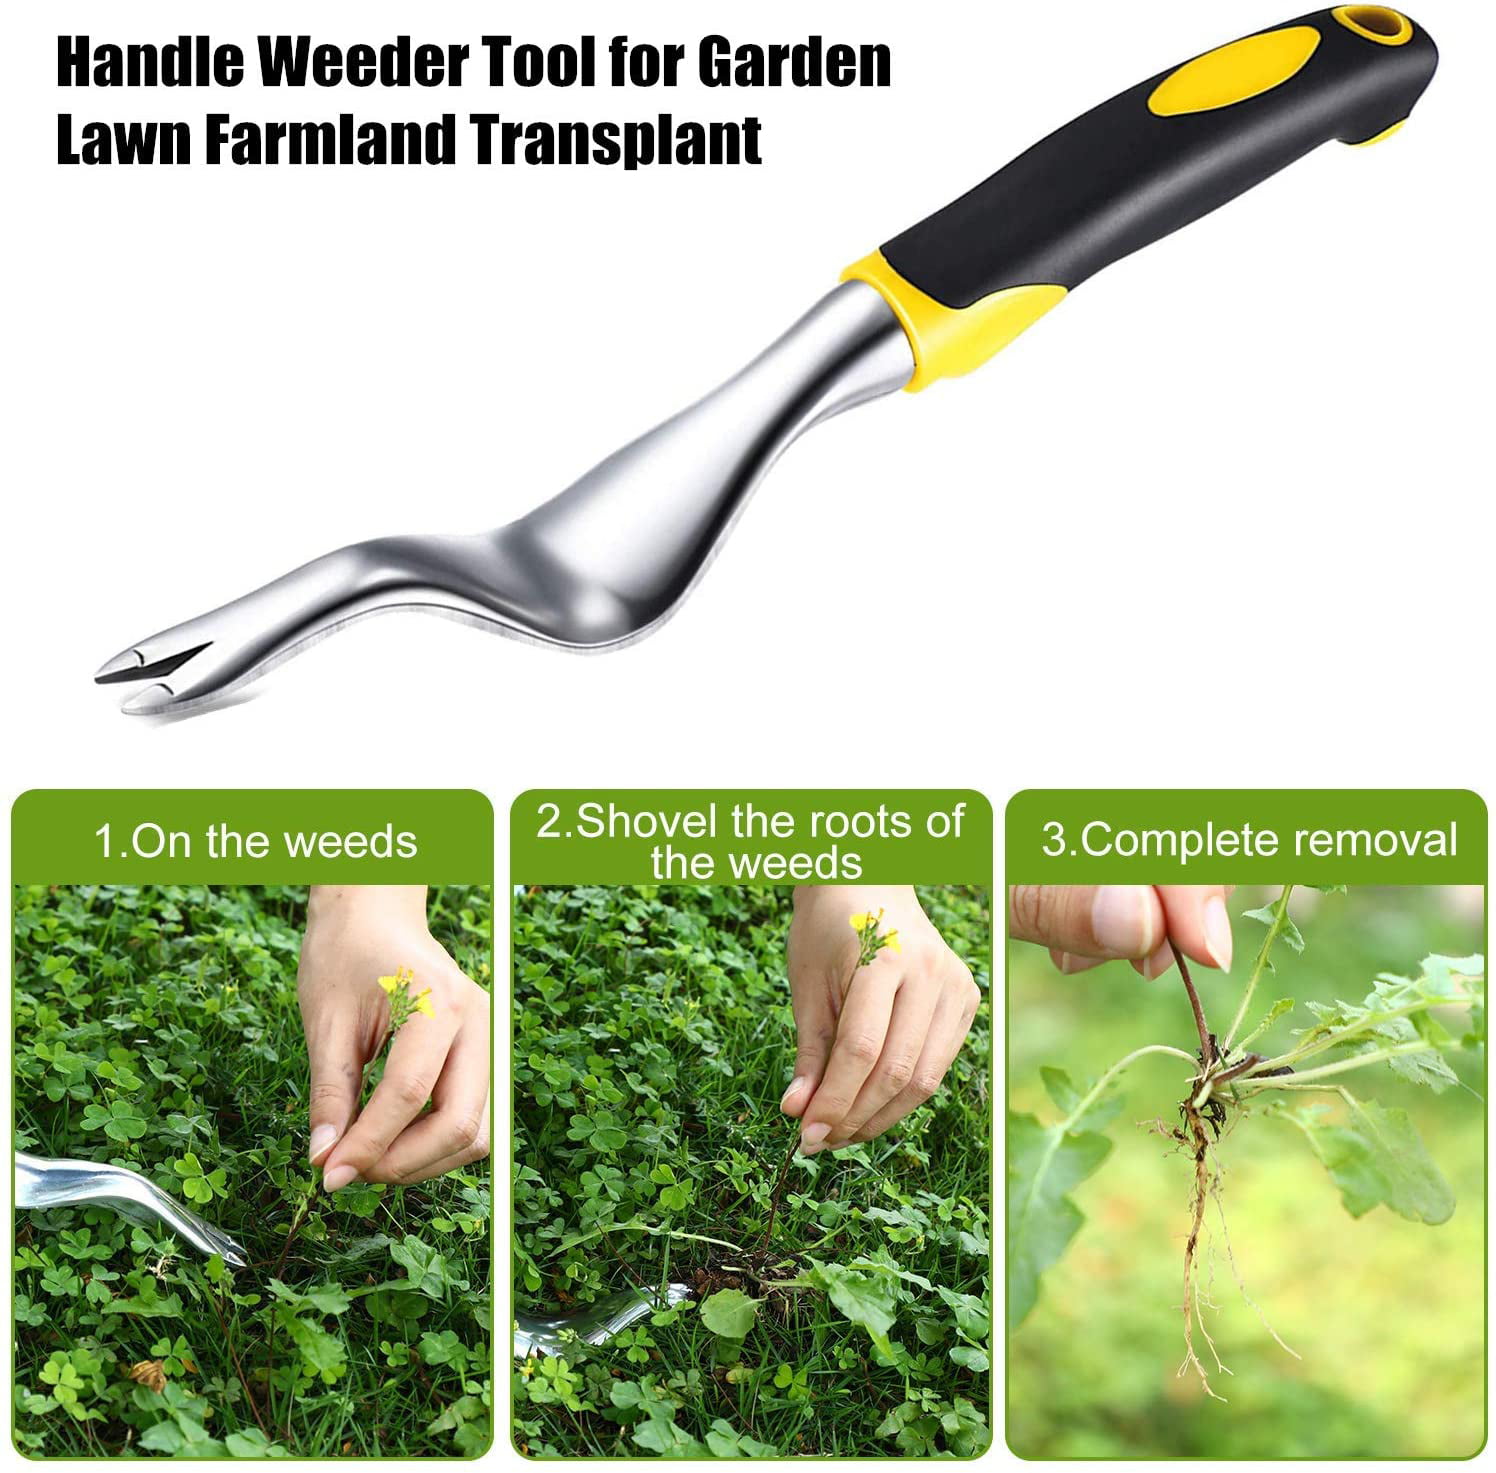 B/A Weeder Tool for Garden,Crevice WeederWeed Puller Tool with Wheels,Sidewalk Weed Puller Stand Up,Cleaning Garden Tools,Crack and Crevice Weeding Tool Adjustable Weeding Cleaning Tool 